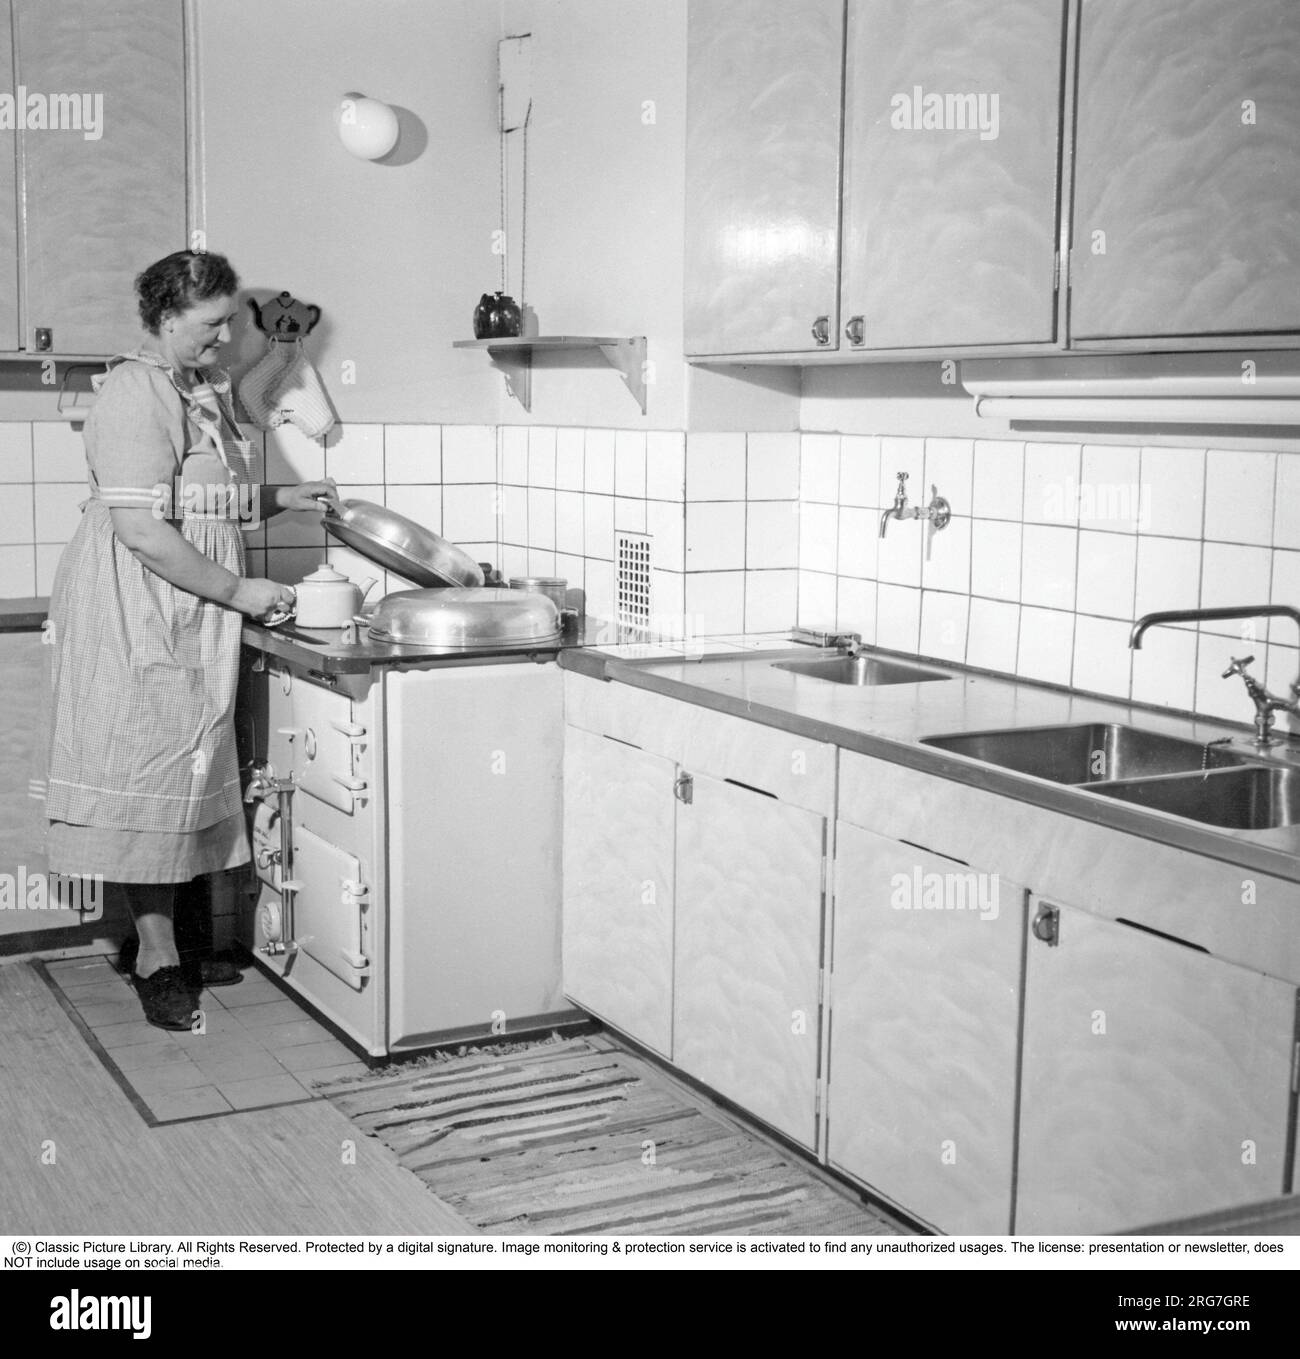 The AGA cooker. A swedish invention by Gustaf Dalén with the principle of heat storage, a combination of two large hotplates and two ovens into one unit, the AGA cooker. The oldest AGA cooker still in use belongs to the Hett family of Sussex and it was installed 1932. This picture was taken 1950 Mrs Ester Lundberg is seen making coffee on the stove. Stock Photo